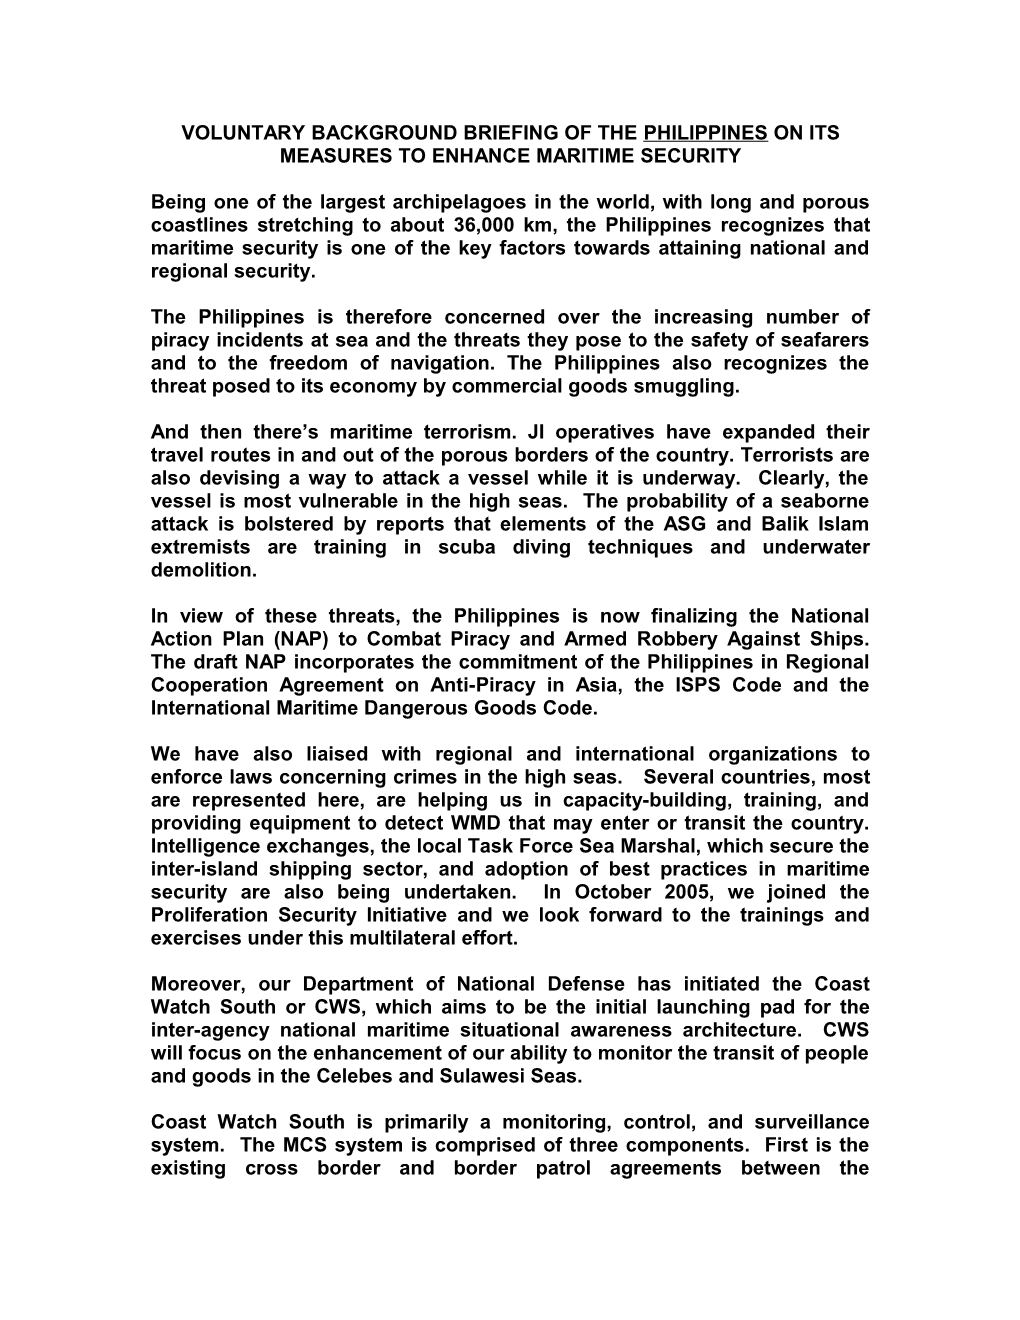 Voluntary Background Briefing of the Philippines on Its Measures to Enhance Maritime Security